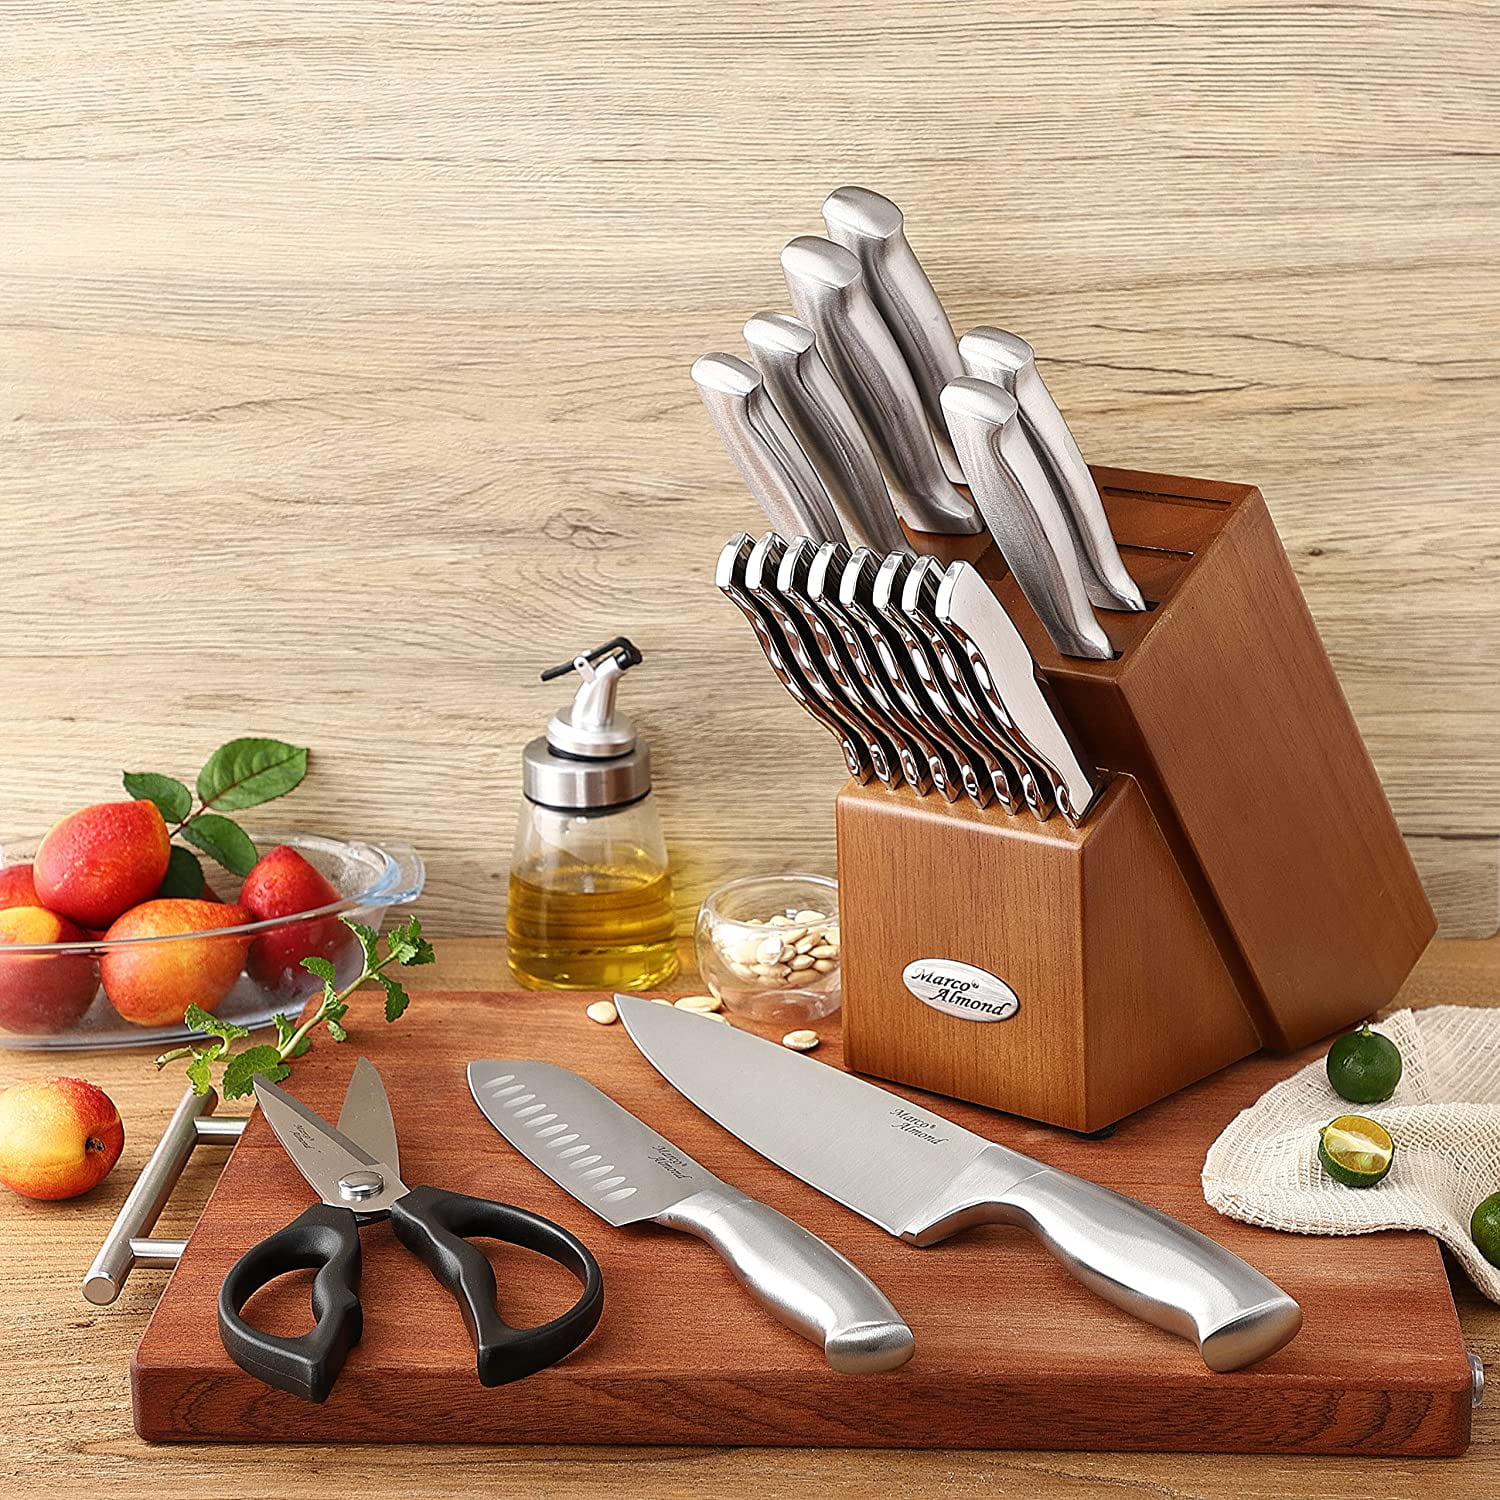 Marco Almond KYA24B 14 Piece Kitchen Stainless Steel Knife Set with  Built-in Knife Sharpener + Marco Almond MA63 Graters for Kitchen